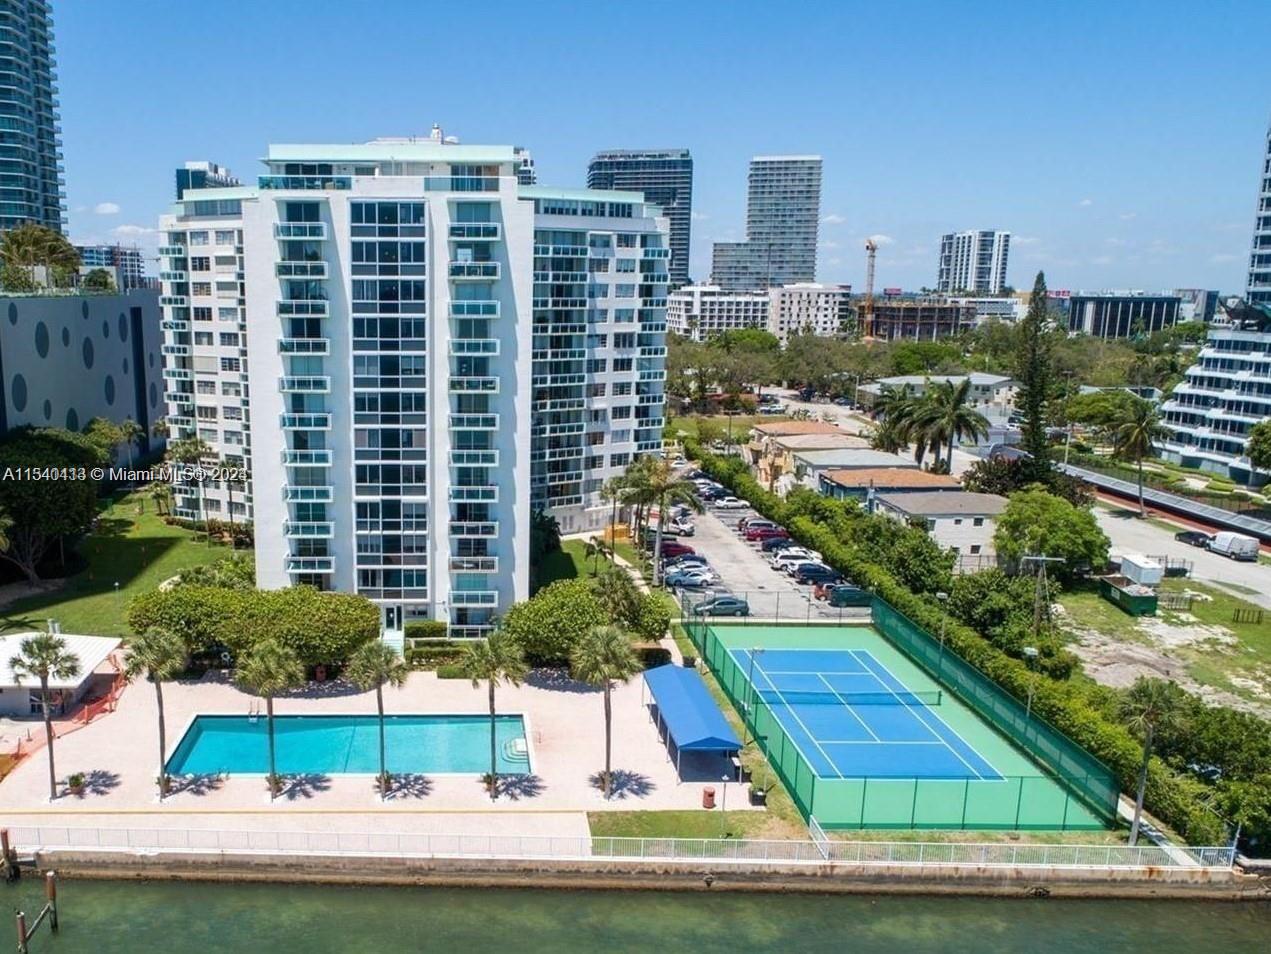 Stunning up grade large studio with amazing Biscayne Bay View. Great amenities, larger poll, tennis Ct. Gym, 24 hr. security, Valet, BBQ aria. one assigned Parking space. Location is fantastic, everything minute away Wynwood, Design District, Midtown, Brickell, Miami Beach and Airport